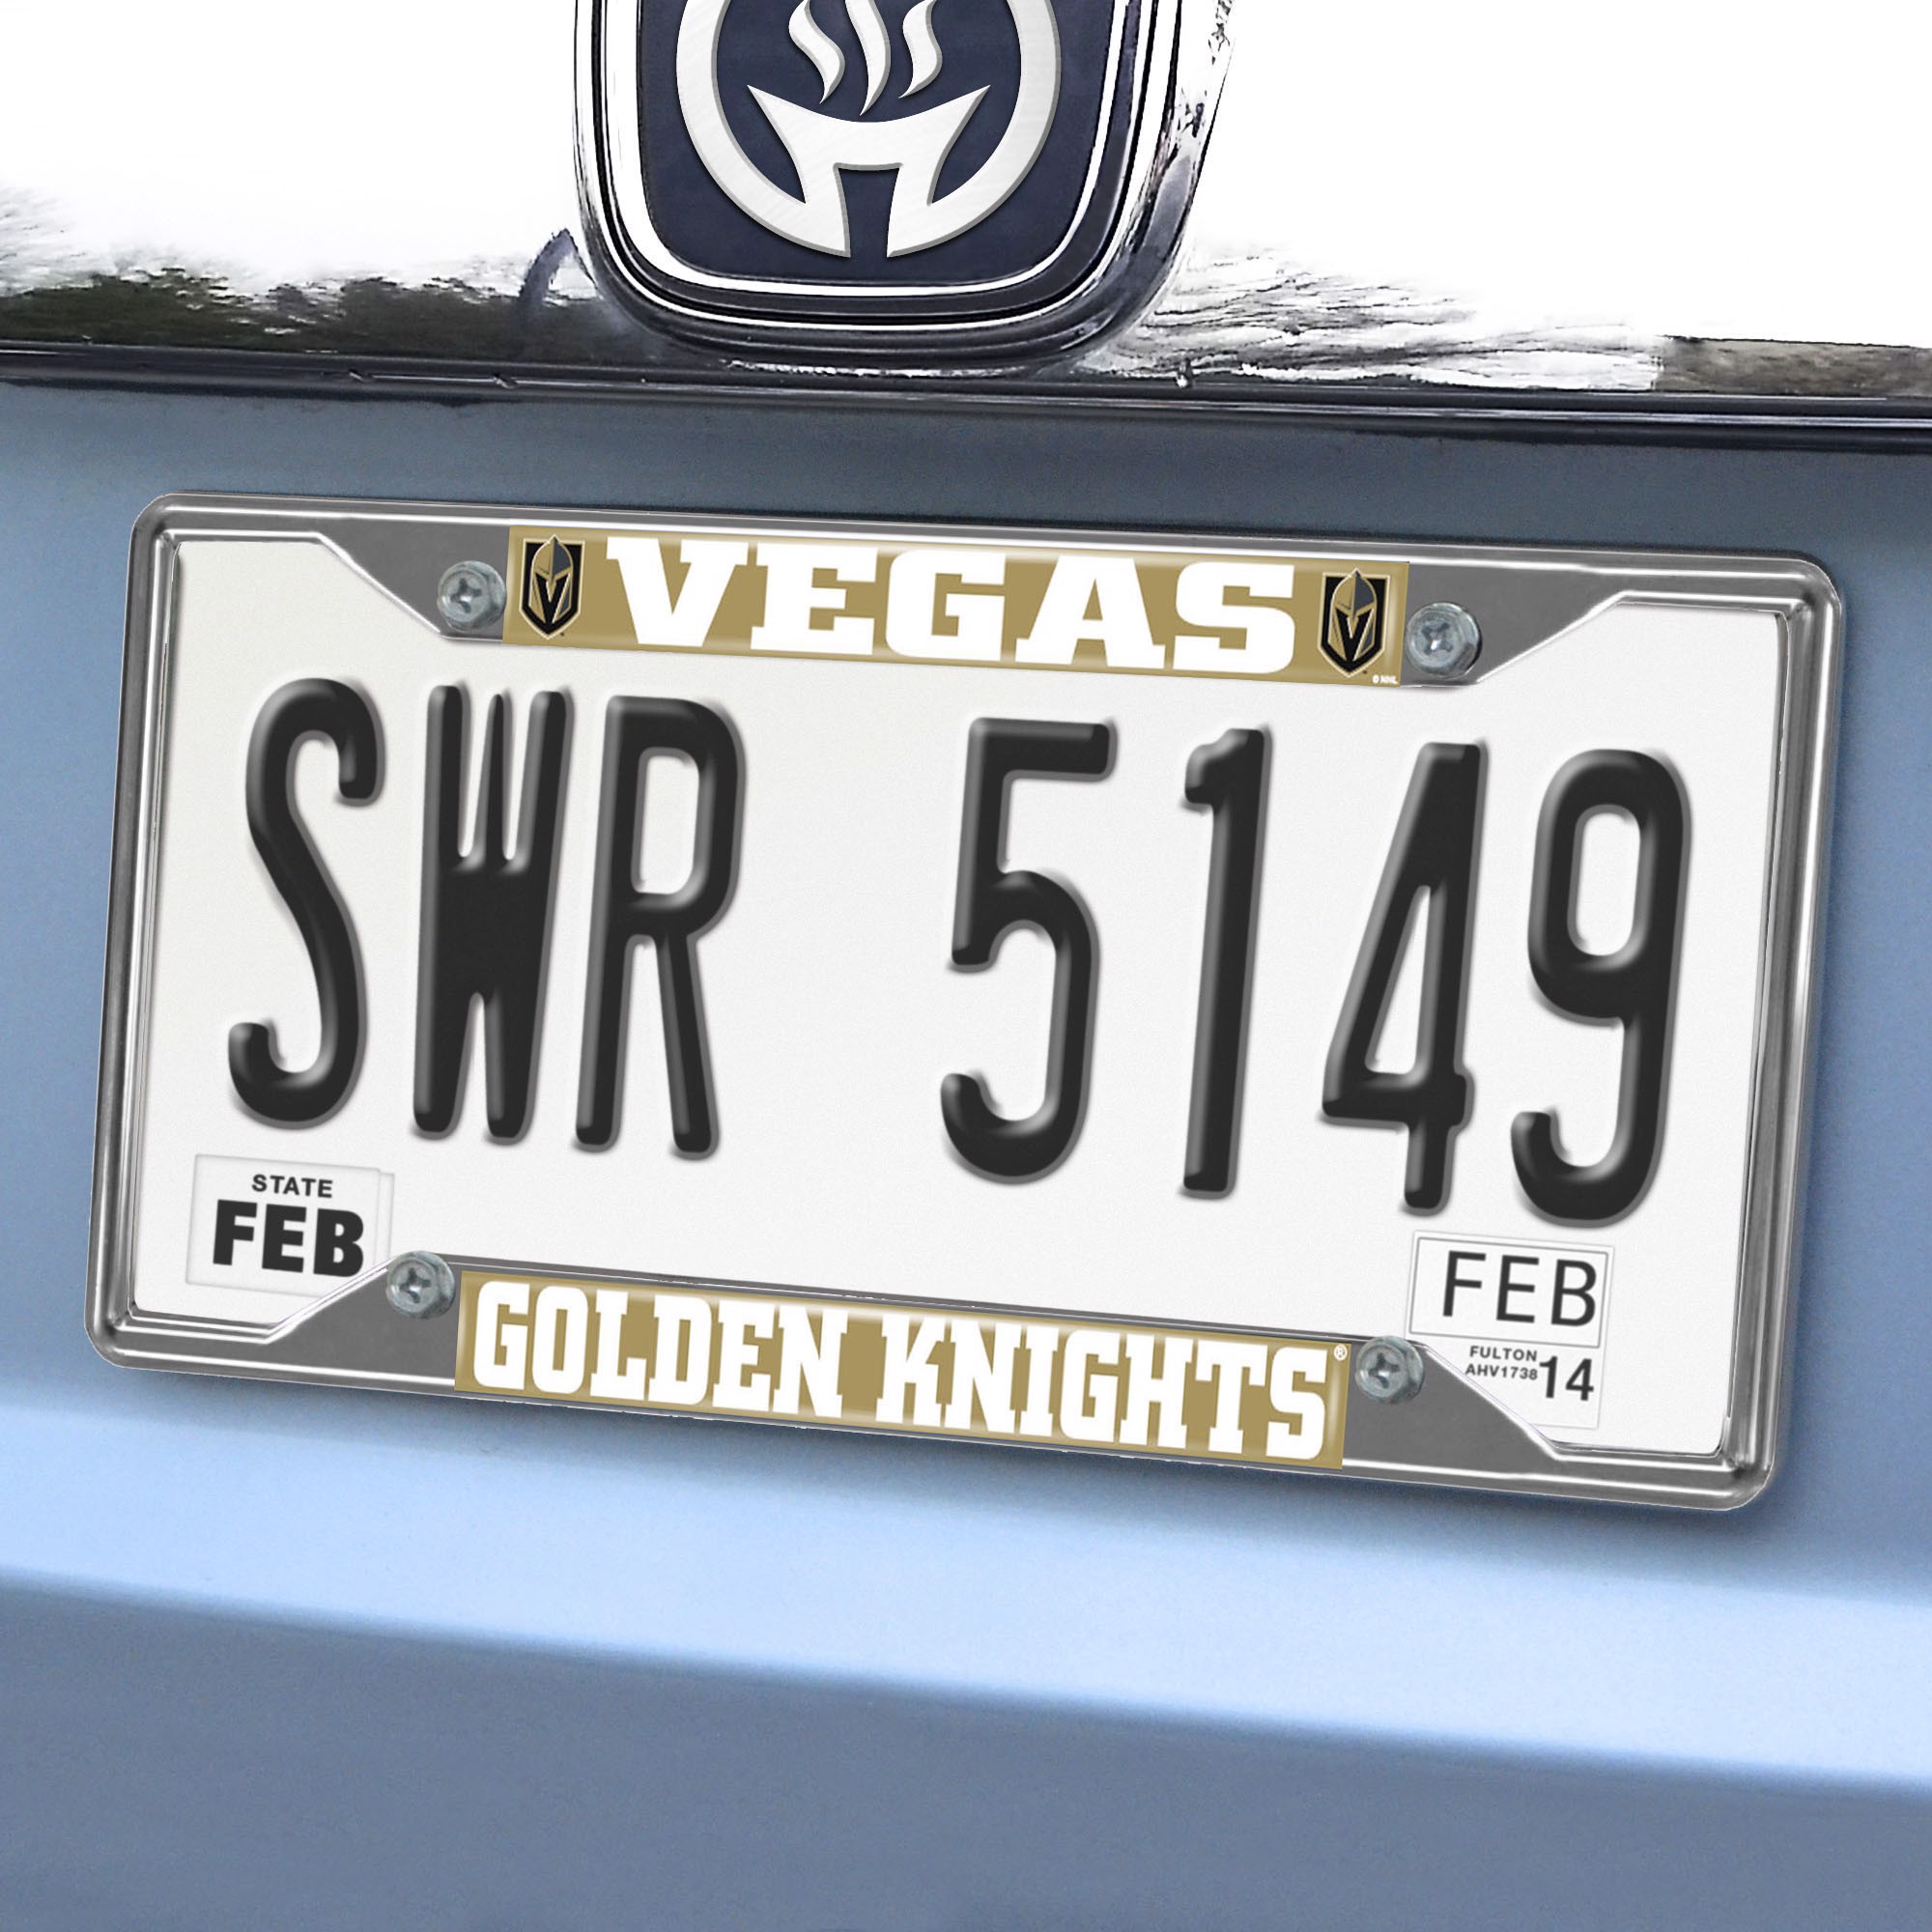 NHL - Vegas Golden Knights License Plate Frame | Fanmats - Sports Licensing  Solutions, LLC